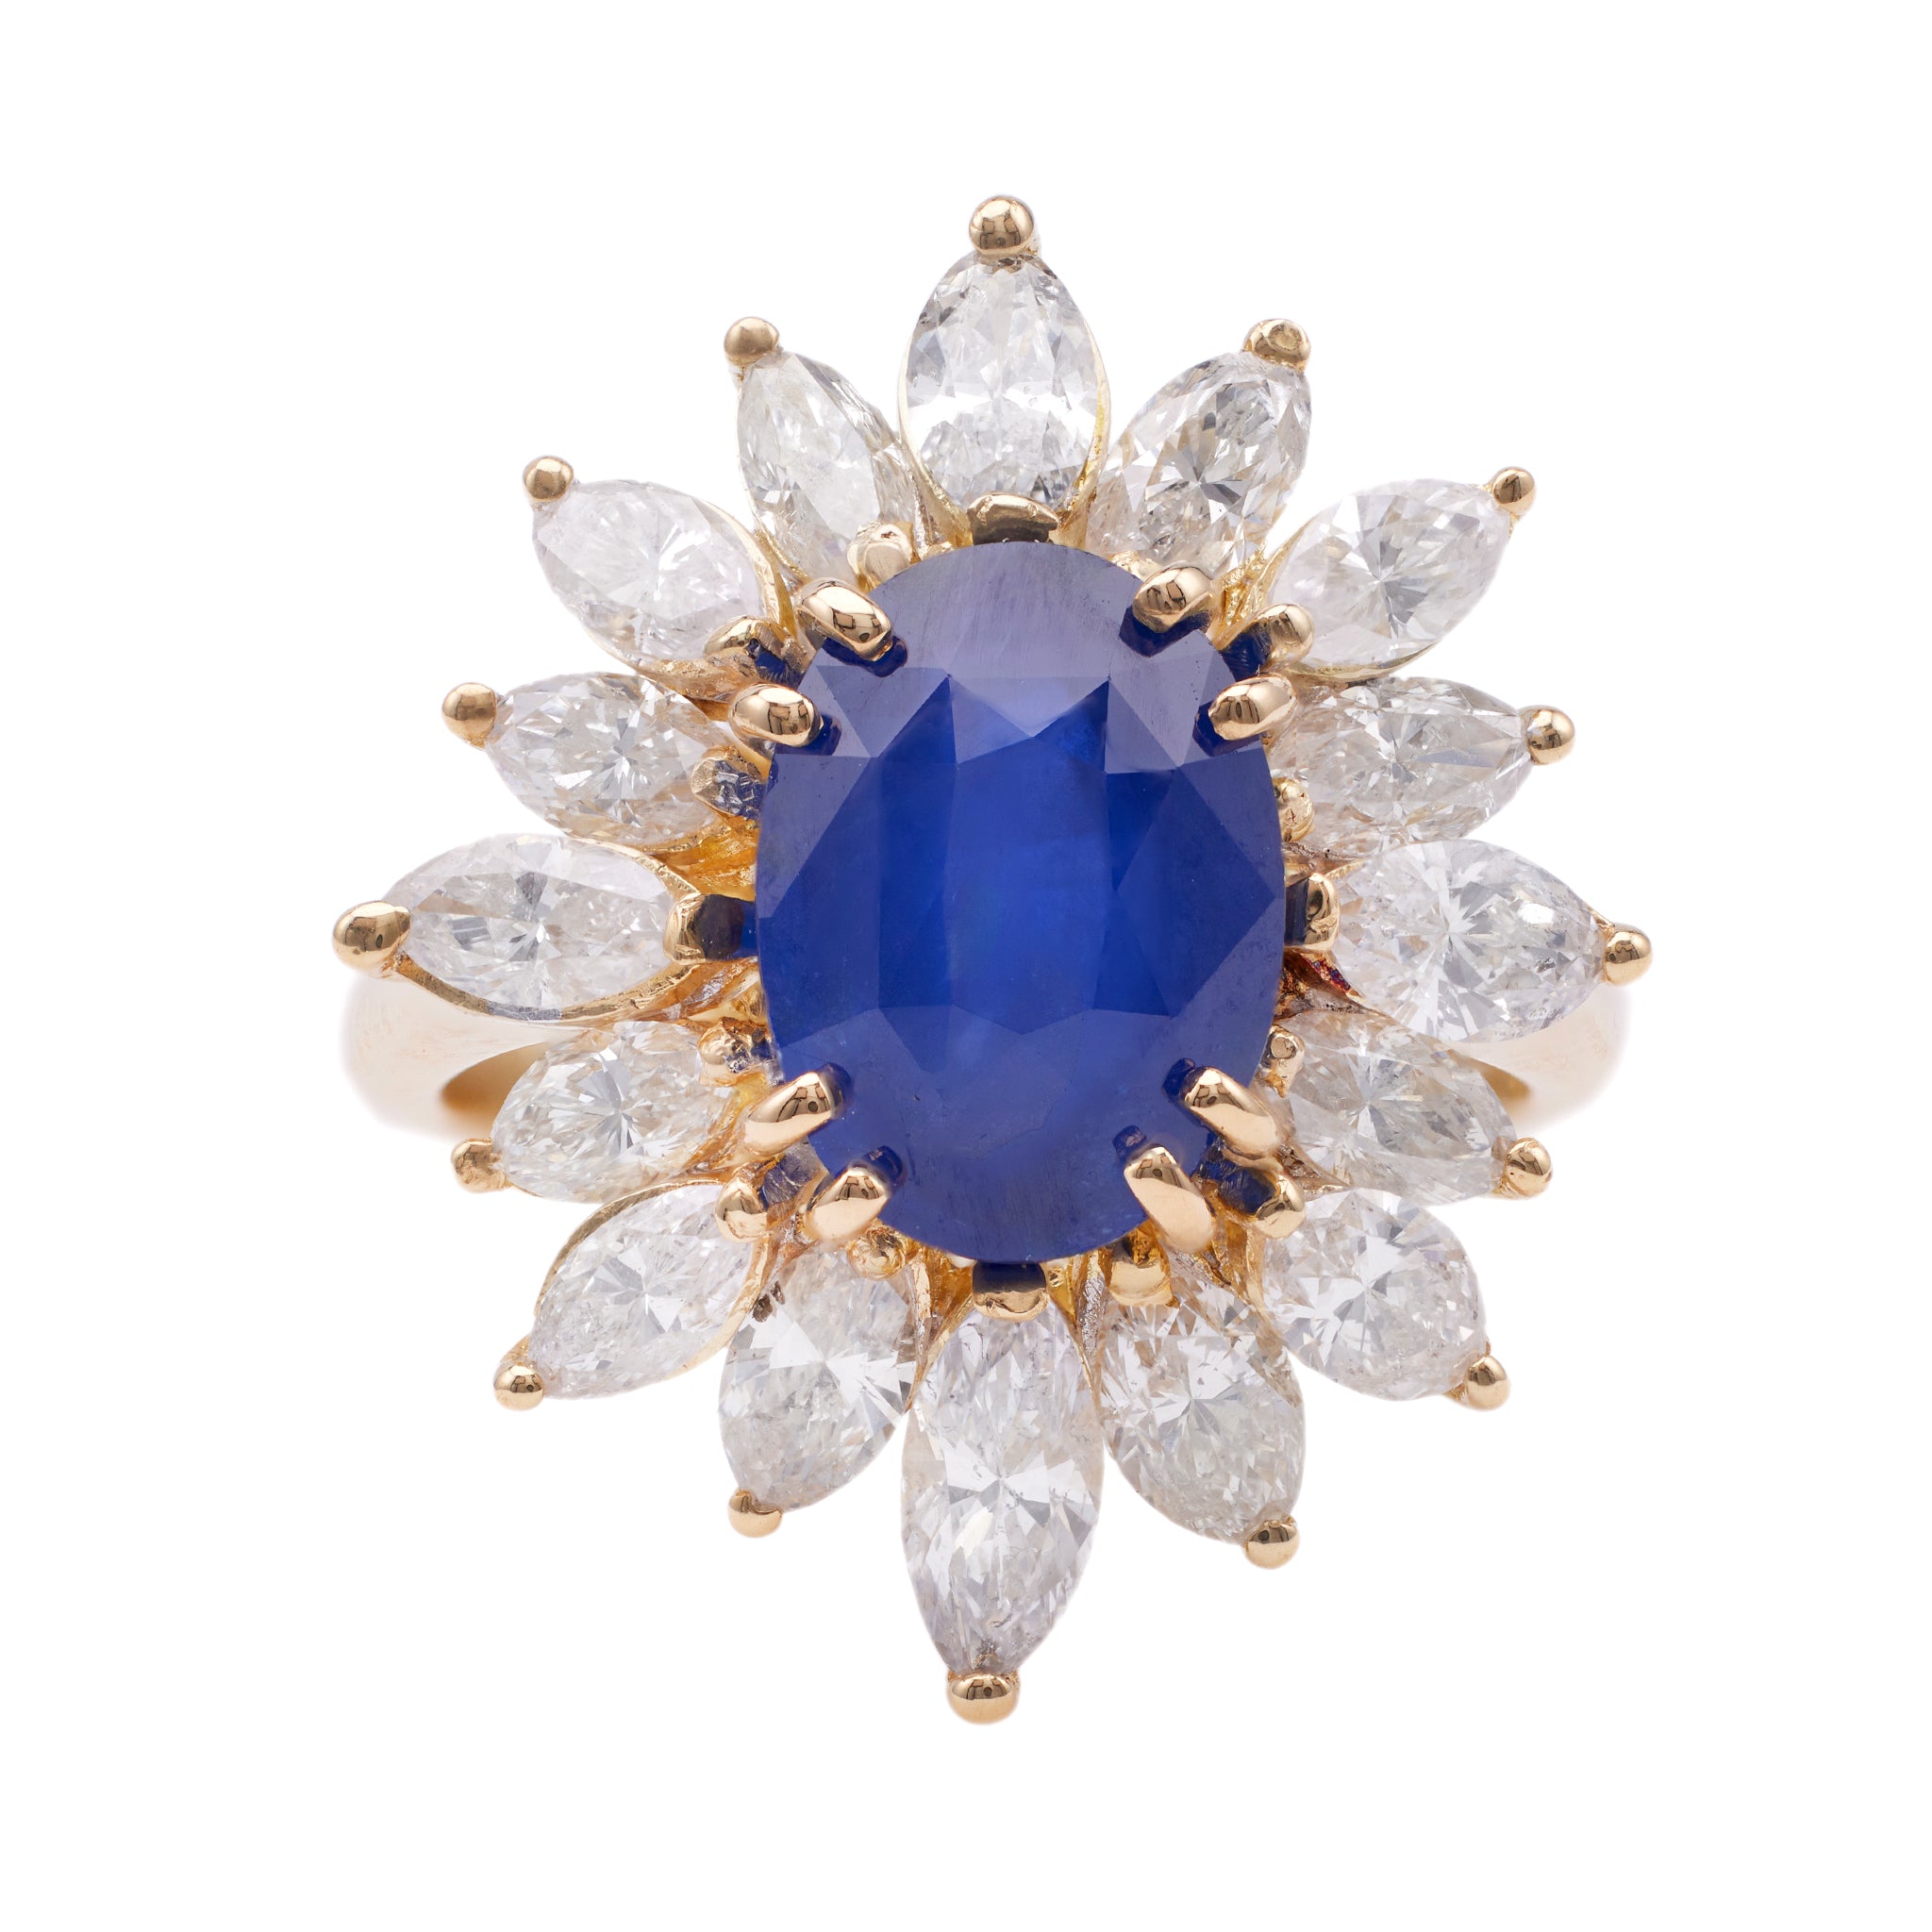 Vintage French GIA Ceylon Sapphire Diamond 18k Yellow Gold Cluster Ring Rings Jack Weir & Sons   